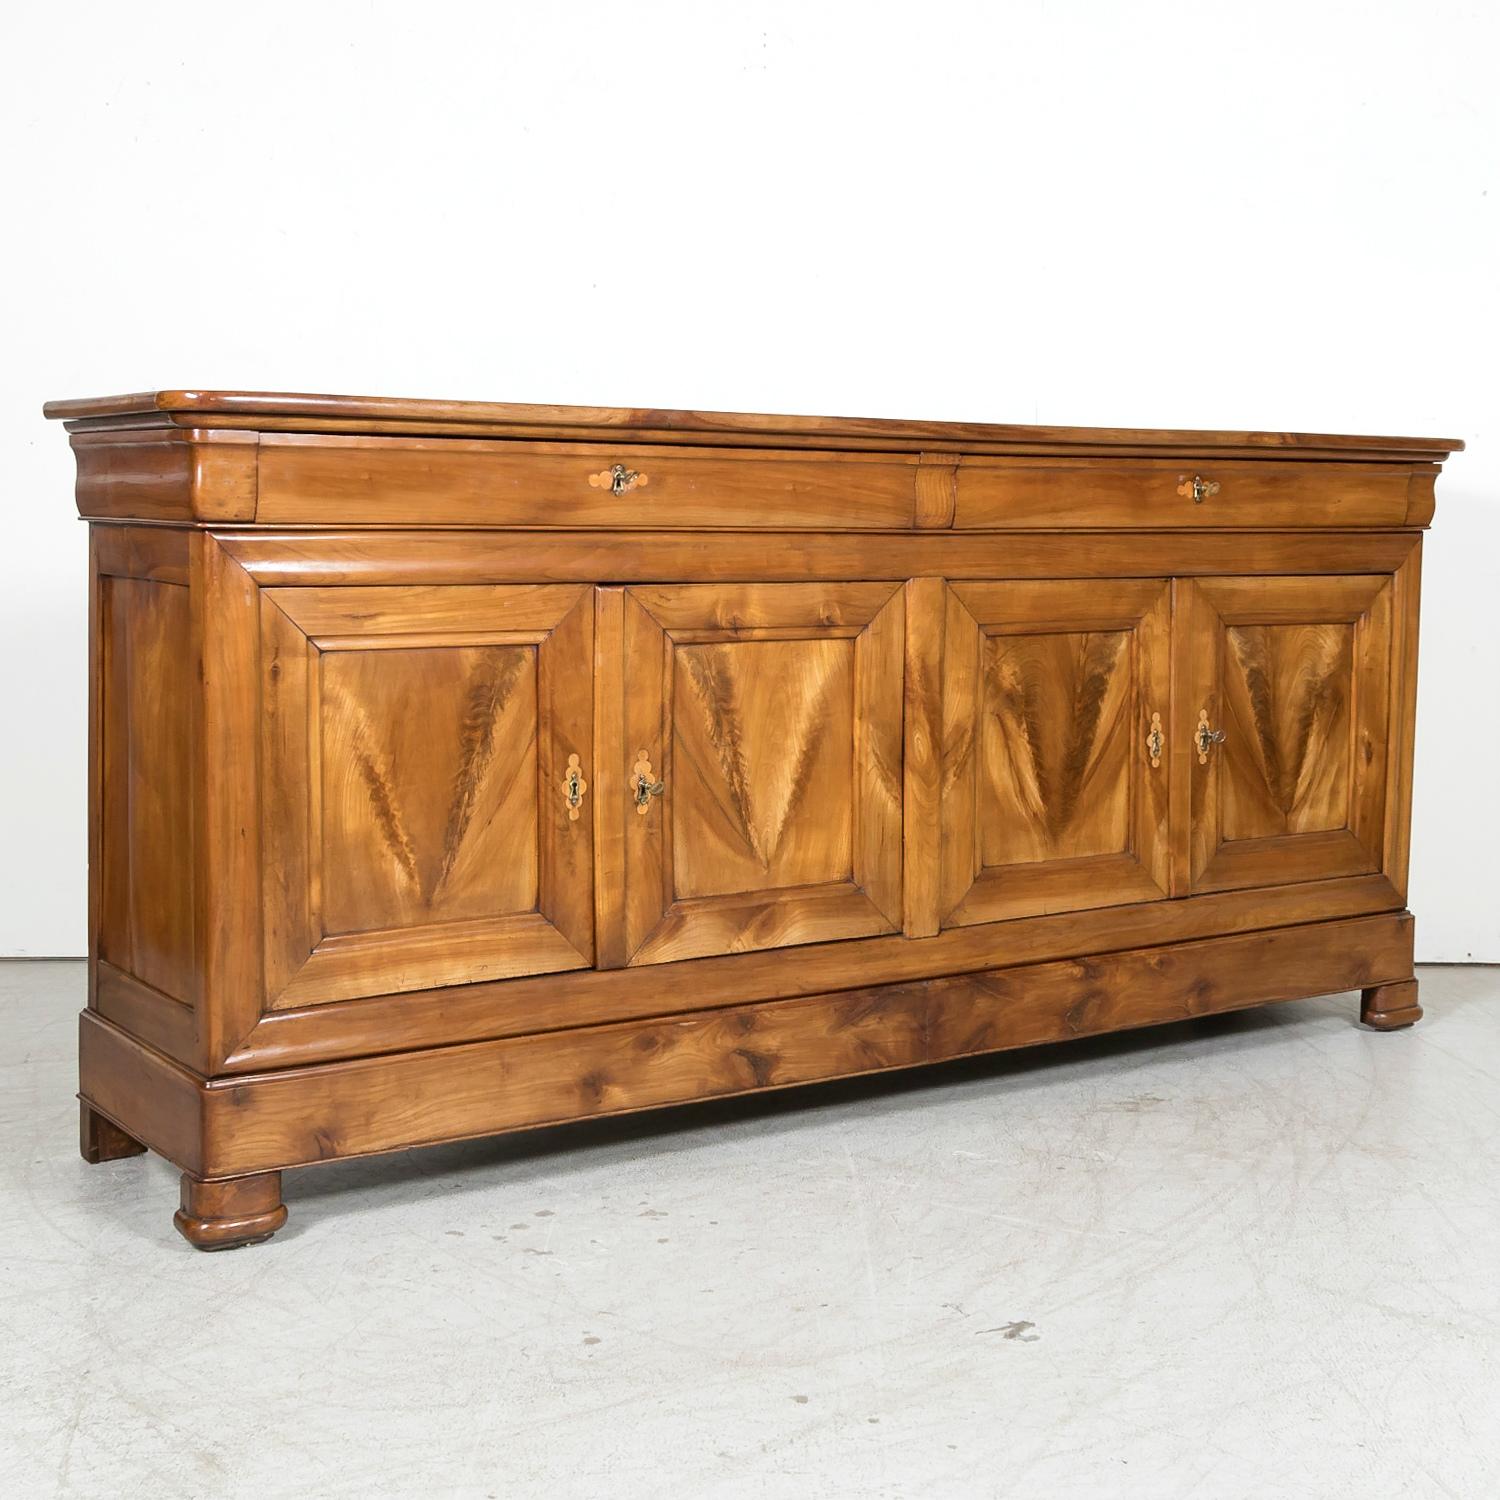 Inlay 19th Century French Louis Philippe Period Four-Door Cherry Wood Enfilade Buffet